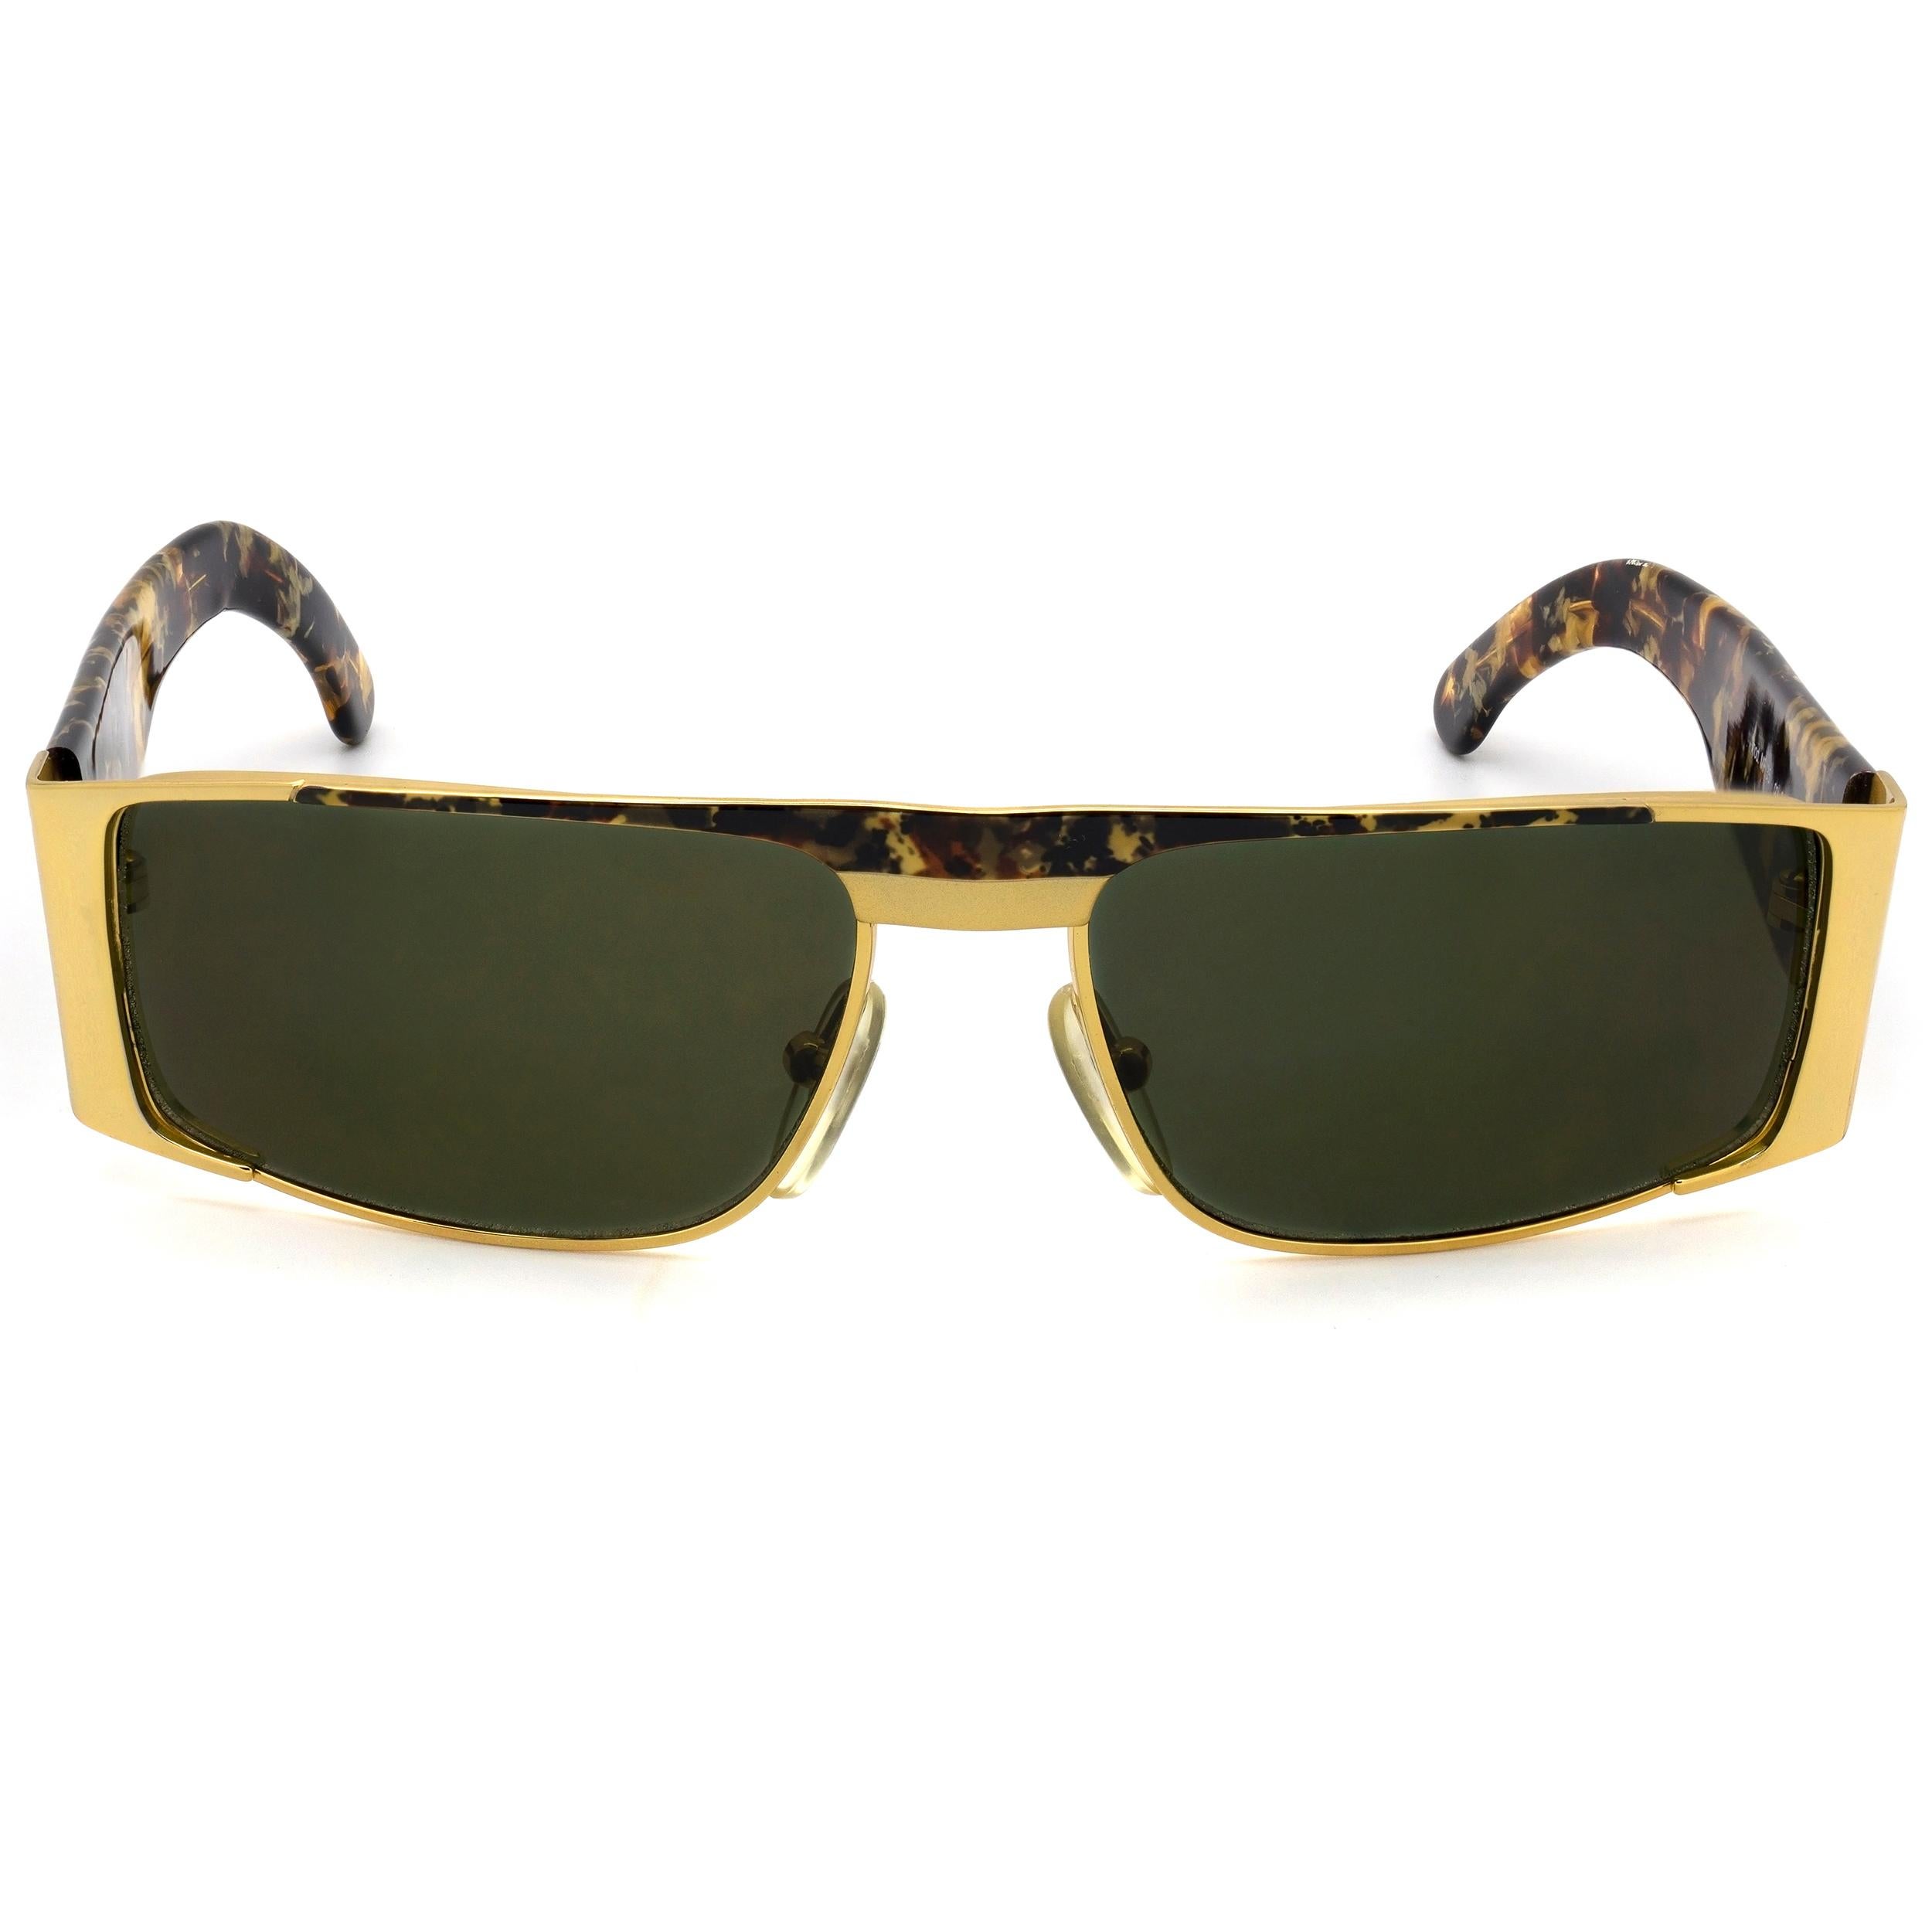 Prince Egon von Furstenberg vintage sunglasses

Before Diane, there was Egon. Egon was a prince from Switzerland and he married Diane and thus made Diane Von Furstenburg a princess. An acclaimed fashion designer, he was a contemporary of Gianni